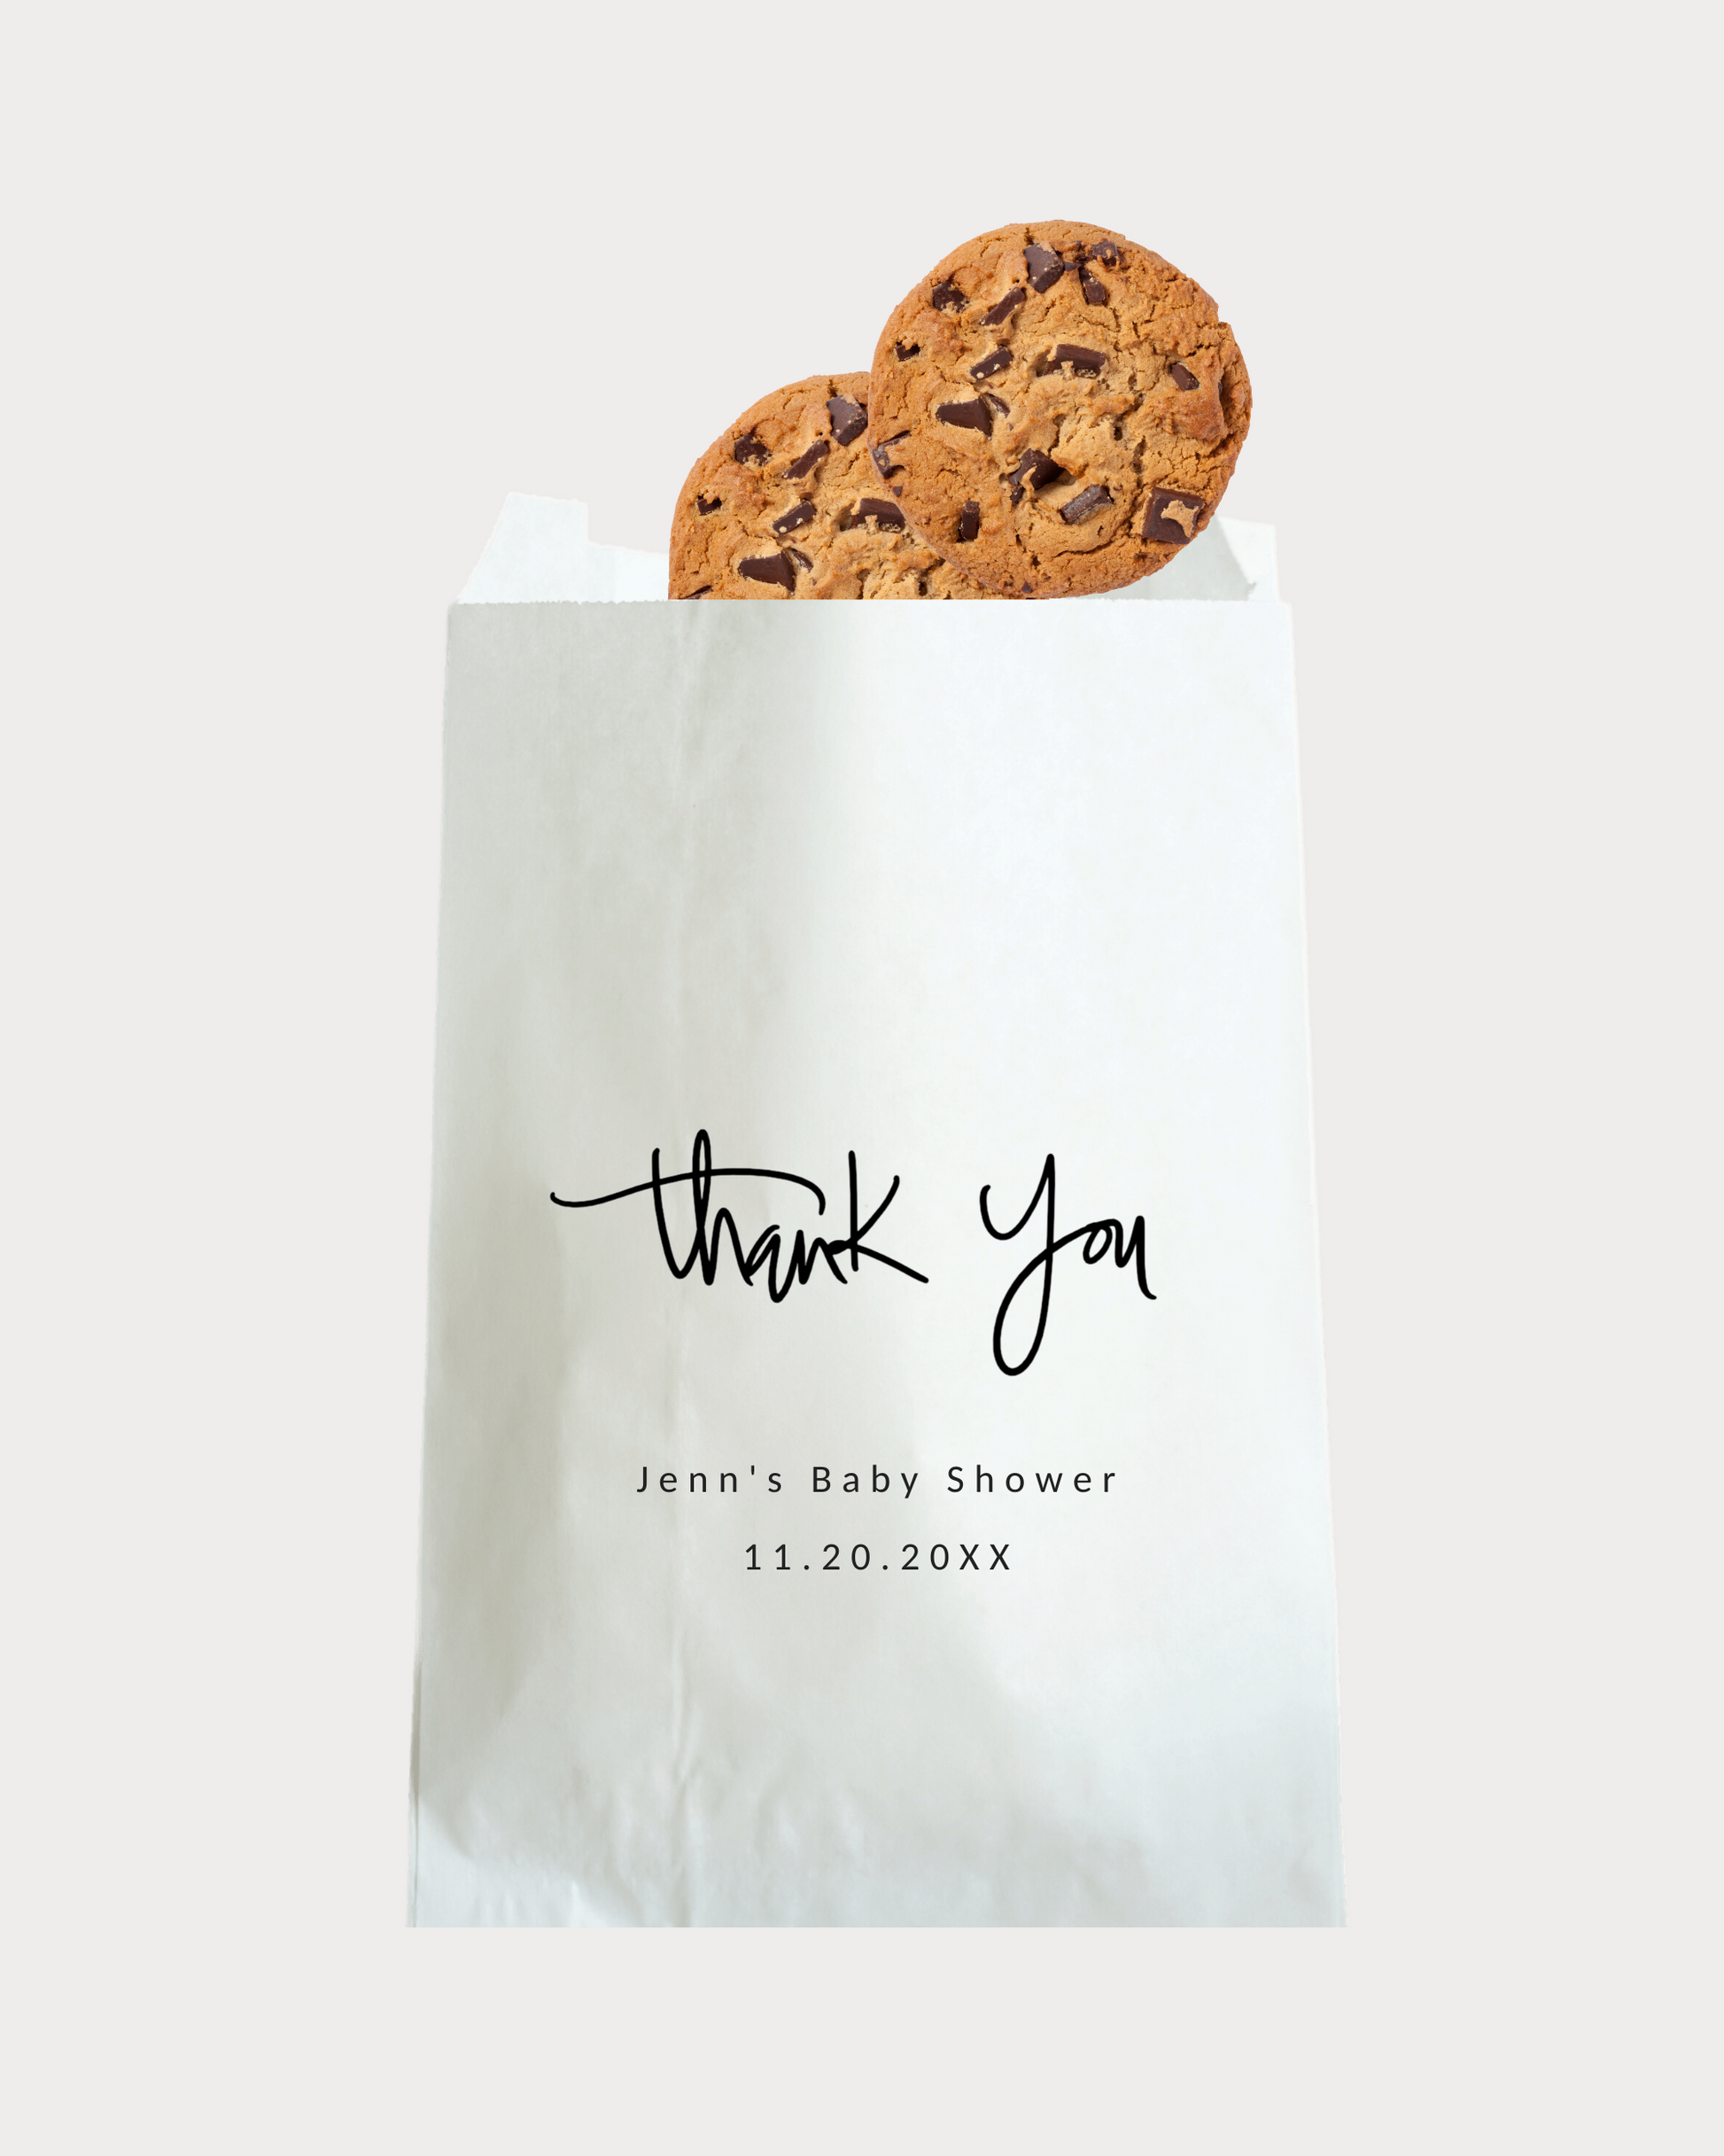 Personalized Thank You party gift bags. Perfect for multiple occasions including weddings, baby shower, bridal shower, birthdays and more. We've got exactly what you're looking for! These white party bags are grease-resistant, durable and food safe.